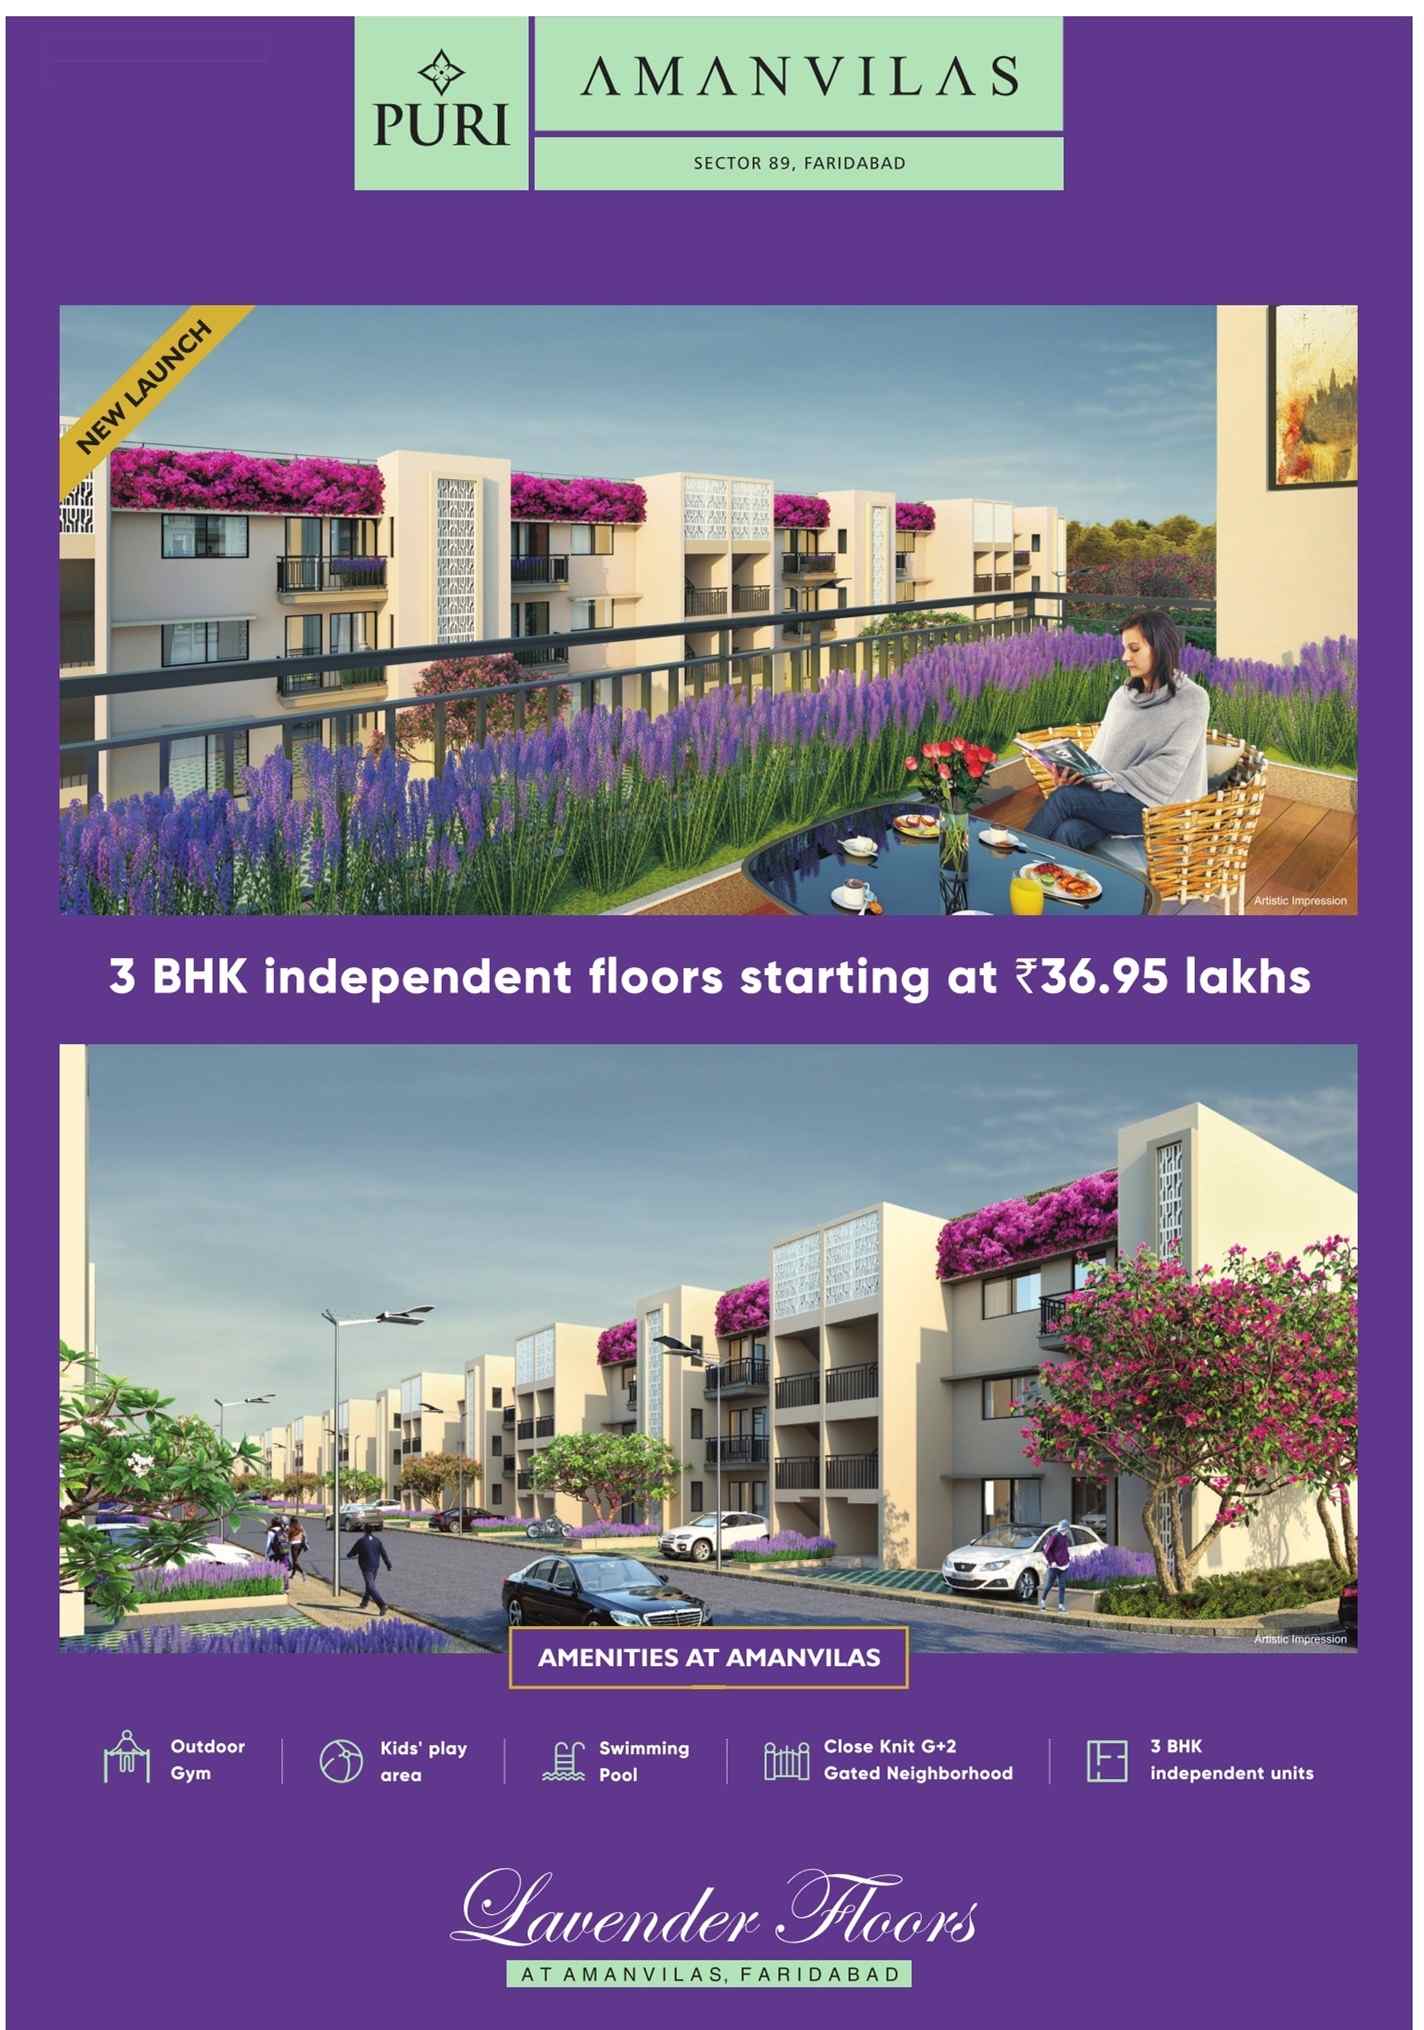 Puri Amanvilas presents 3 BHK independent floors @ Rs. 36.95 lacs in Faridabad Update